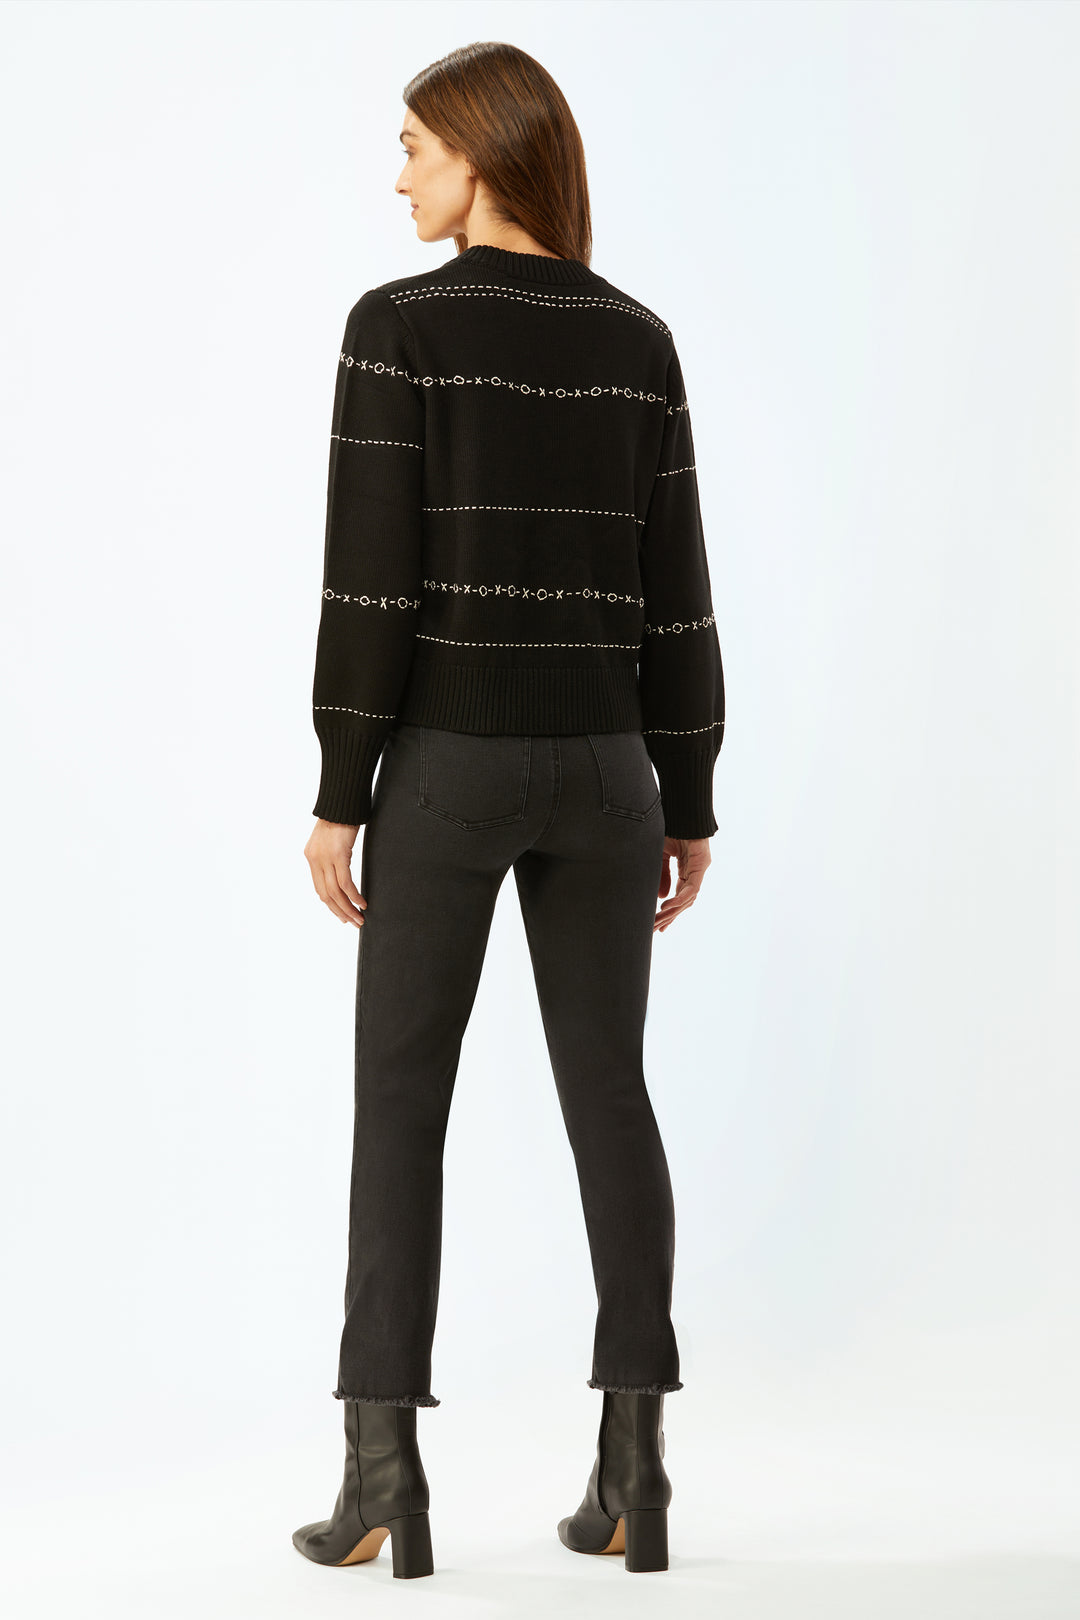 Xs And Os Embroidered Sweater - Black/Ecru